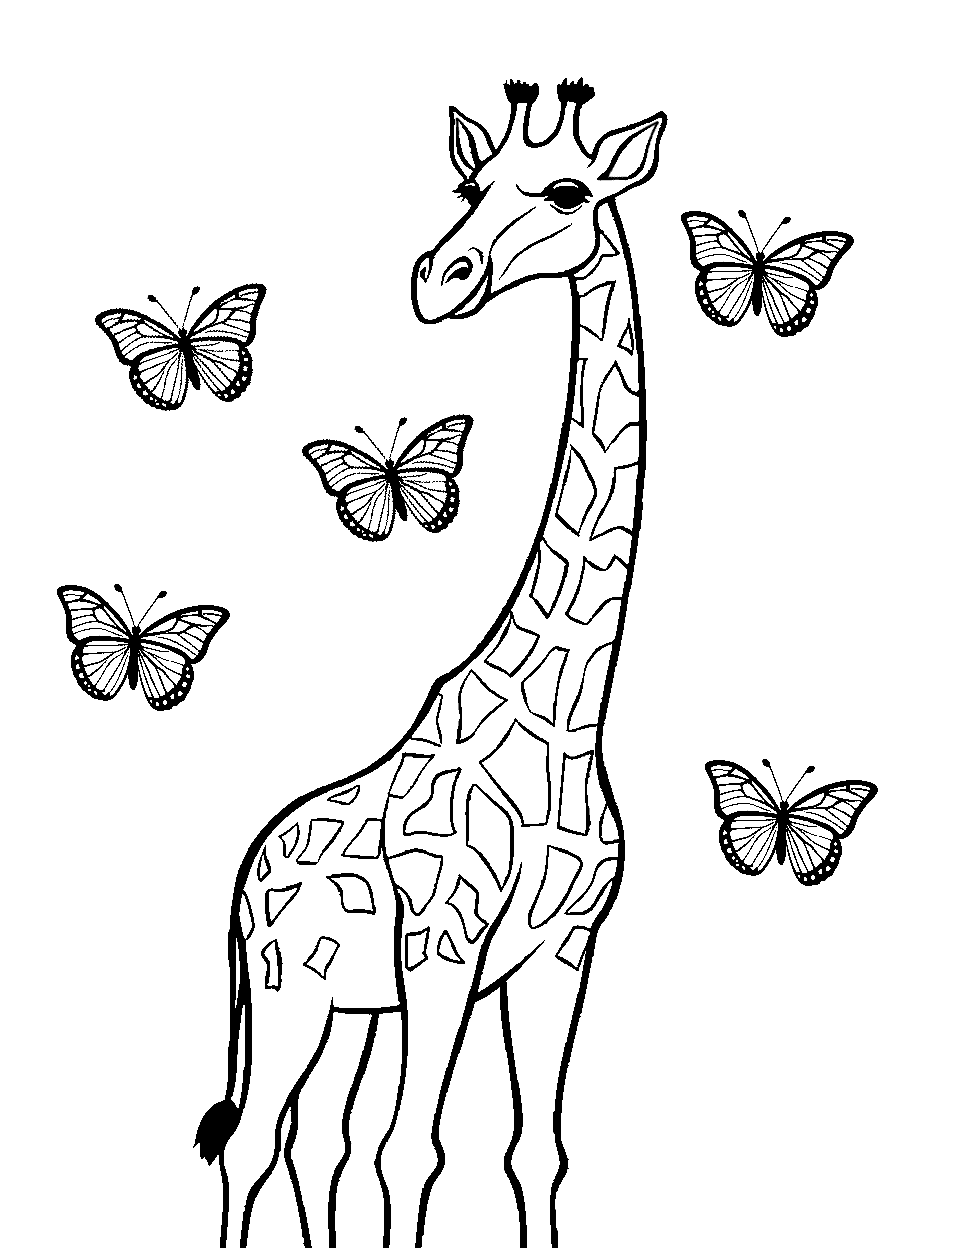 Butterfly Friend Coloring Page - A giraffe with butterfly friends flying around.